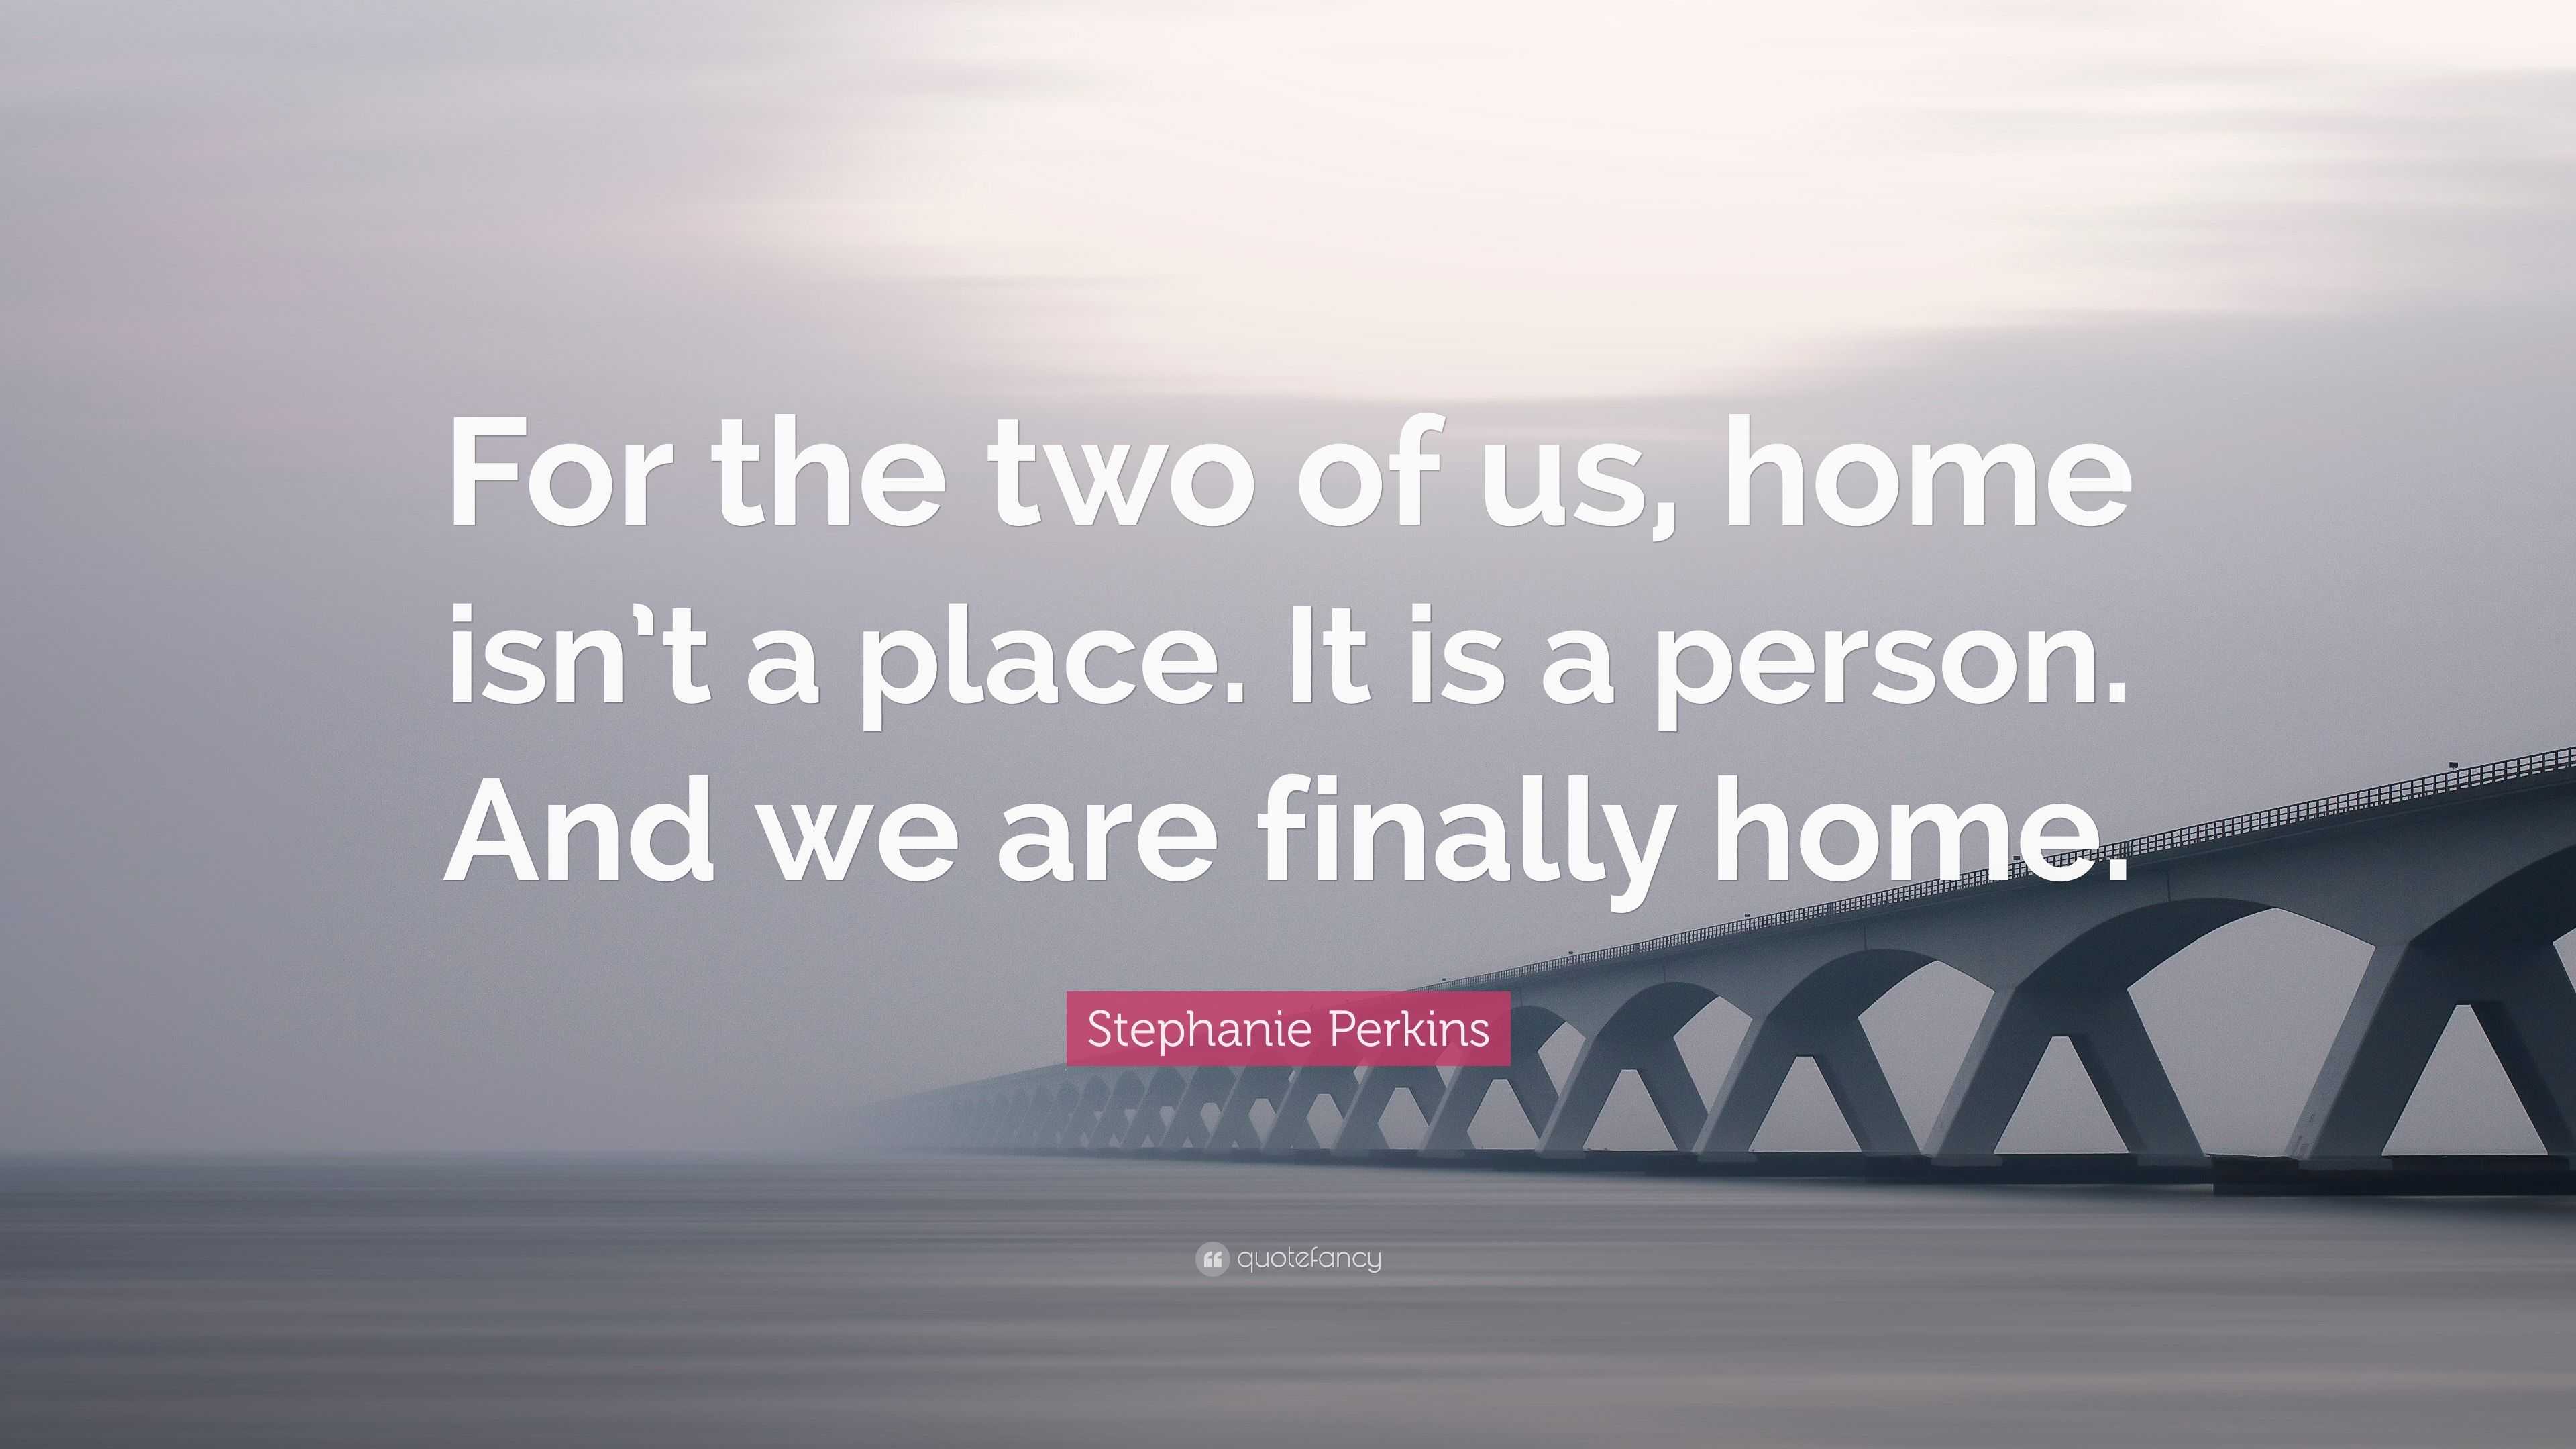 Stephanie Perkins quote: For the two of us, home isn't a place. It